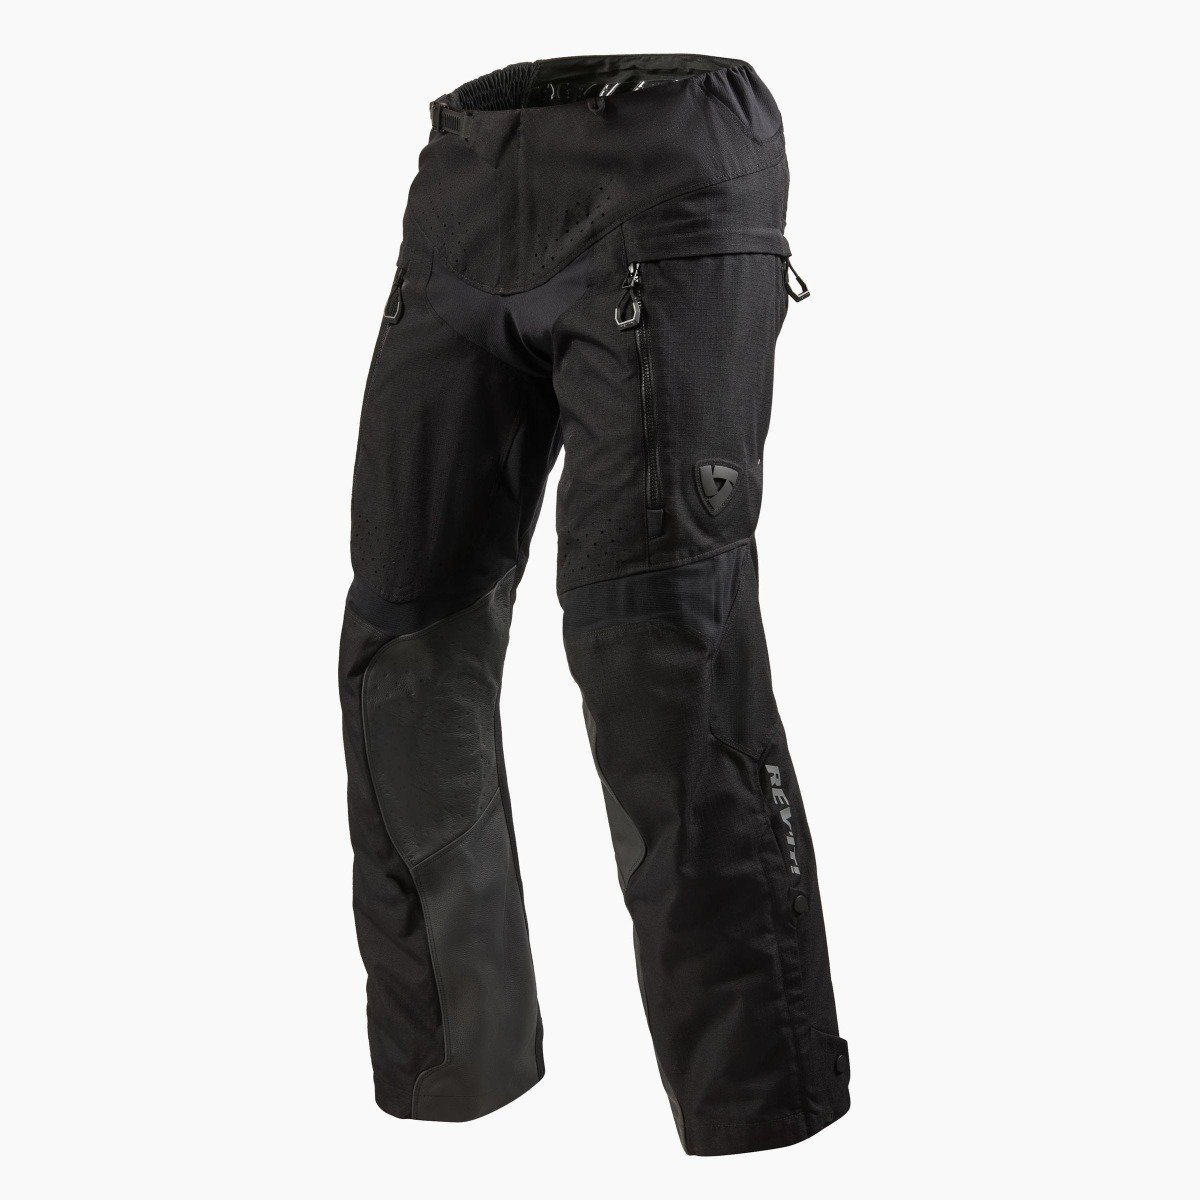 Image of REV'IT! Continent Long Black Motorcycle Pants Talla M